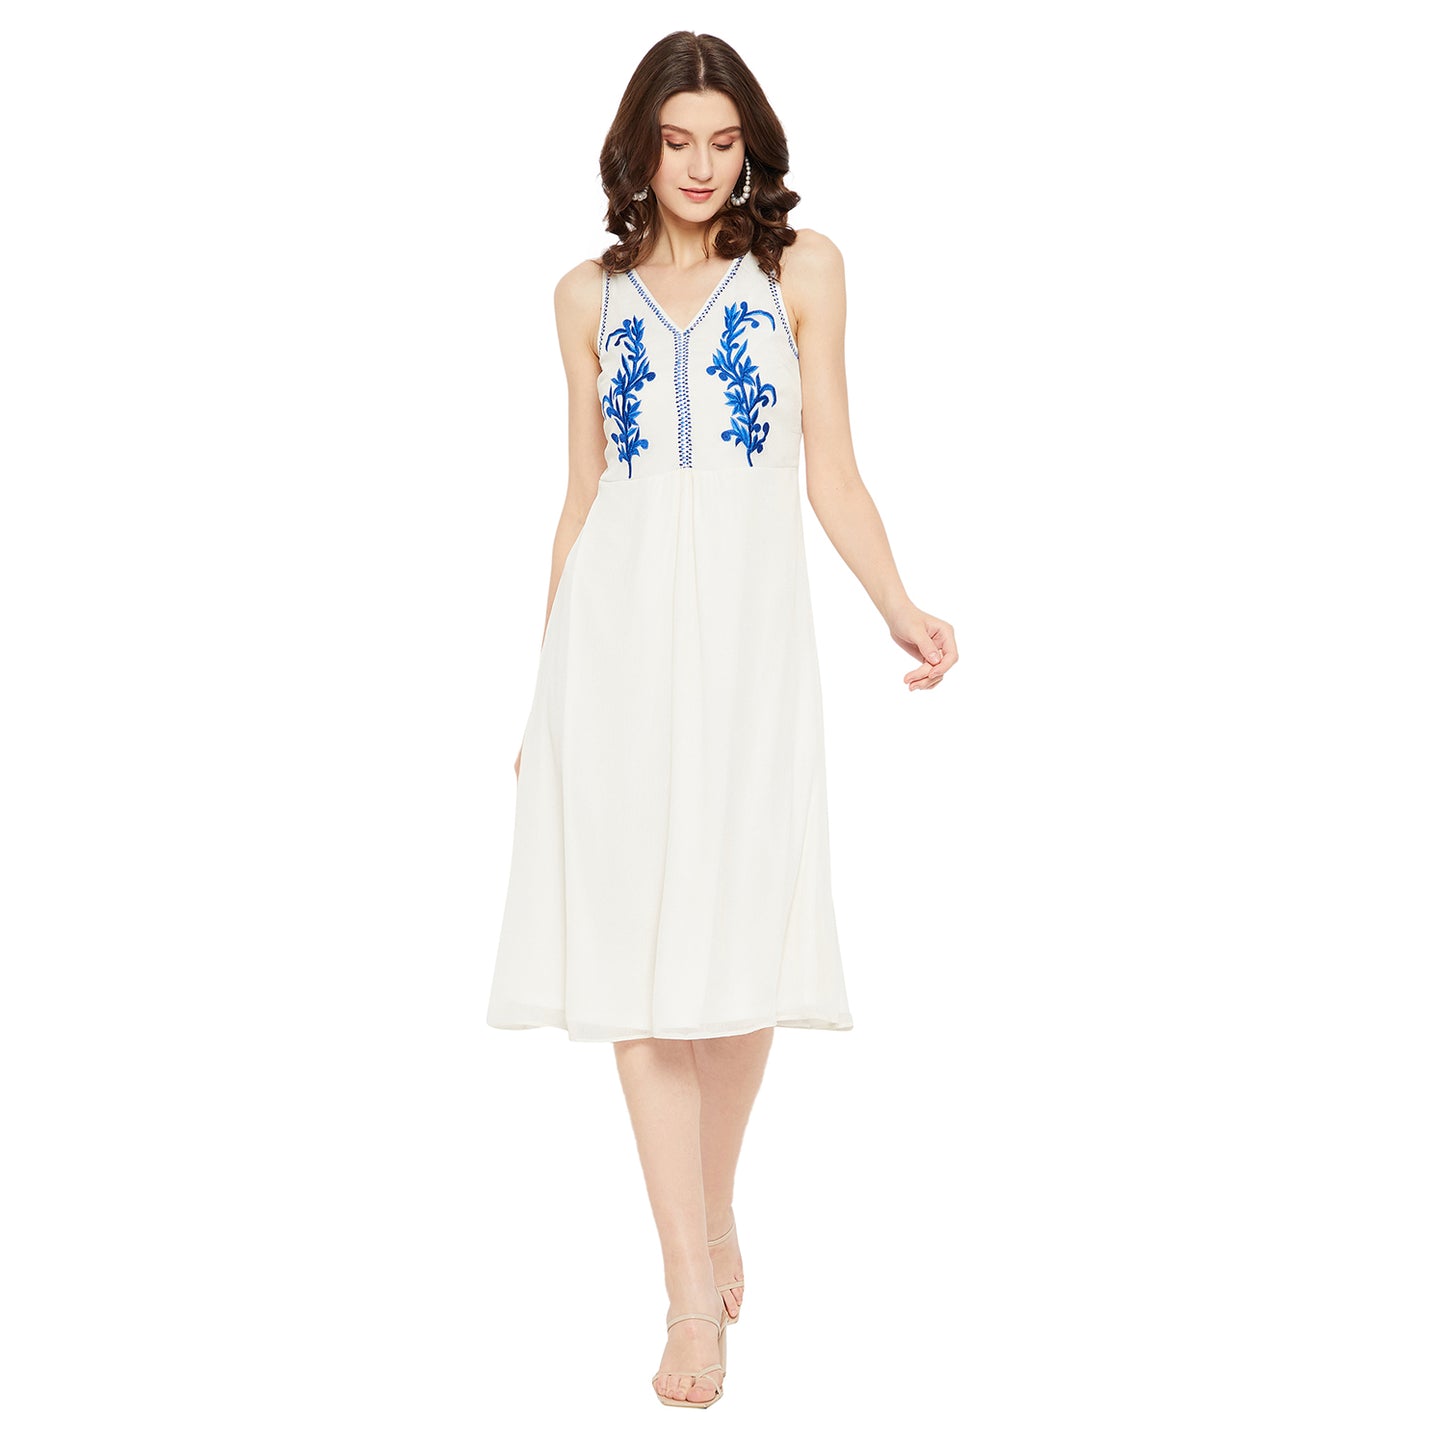 LY2 Women Embroidered Casual Midi Dress